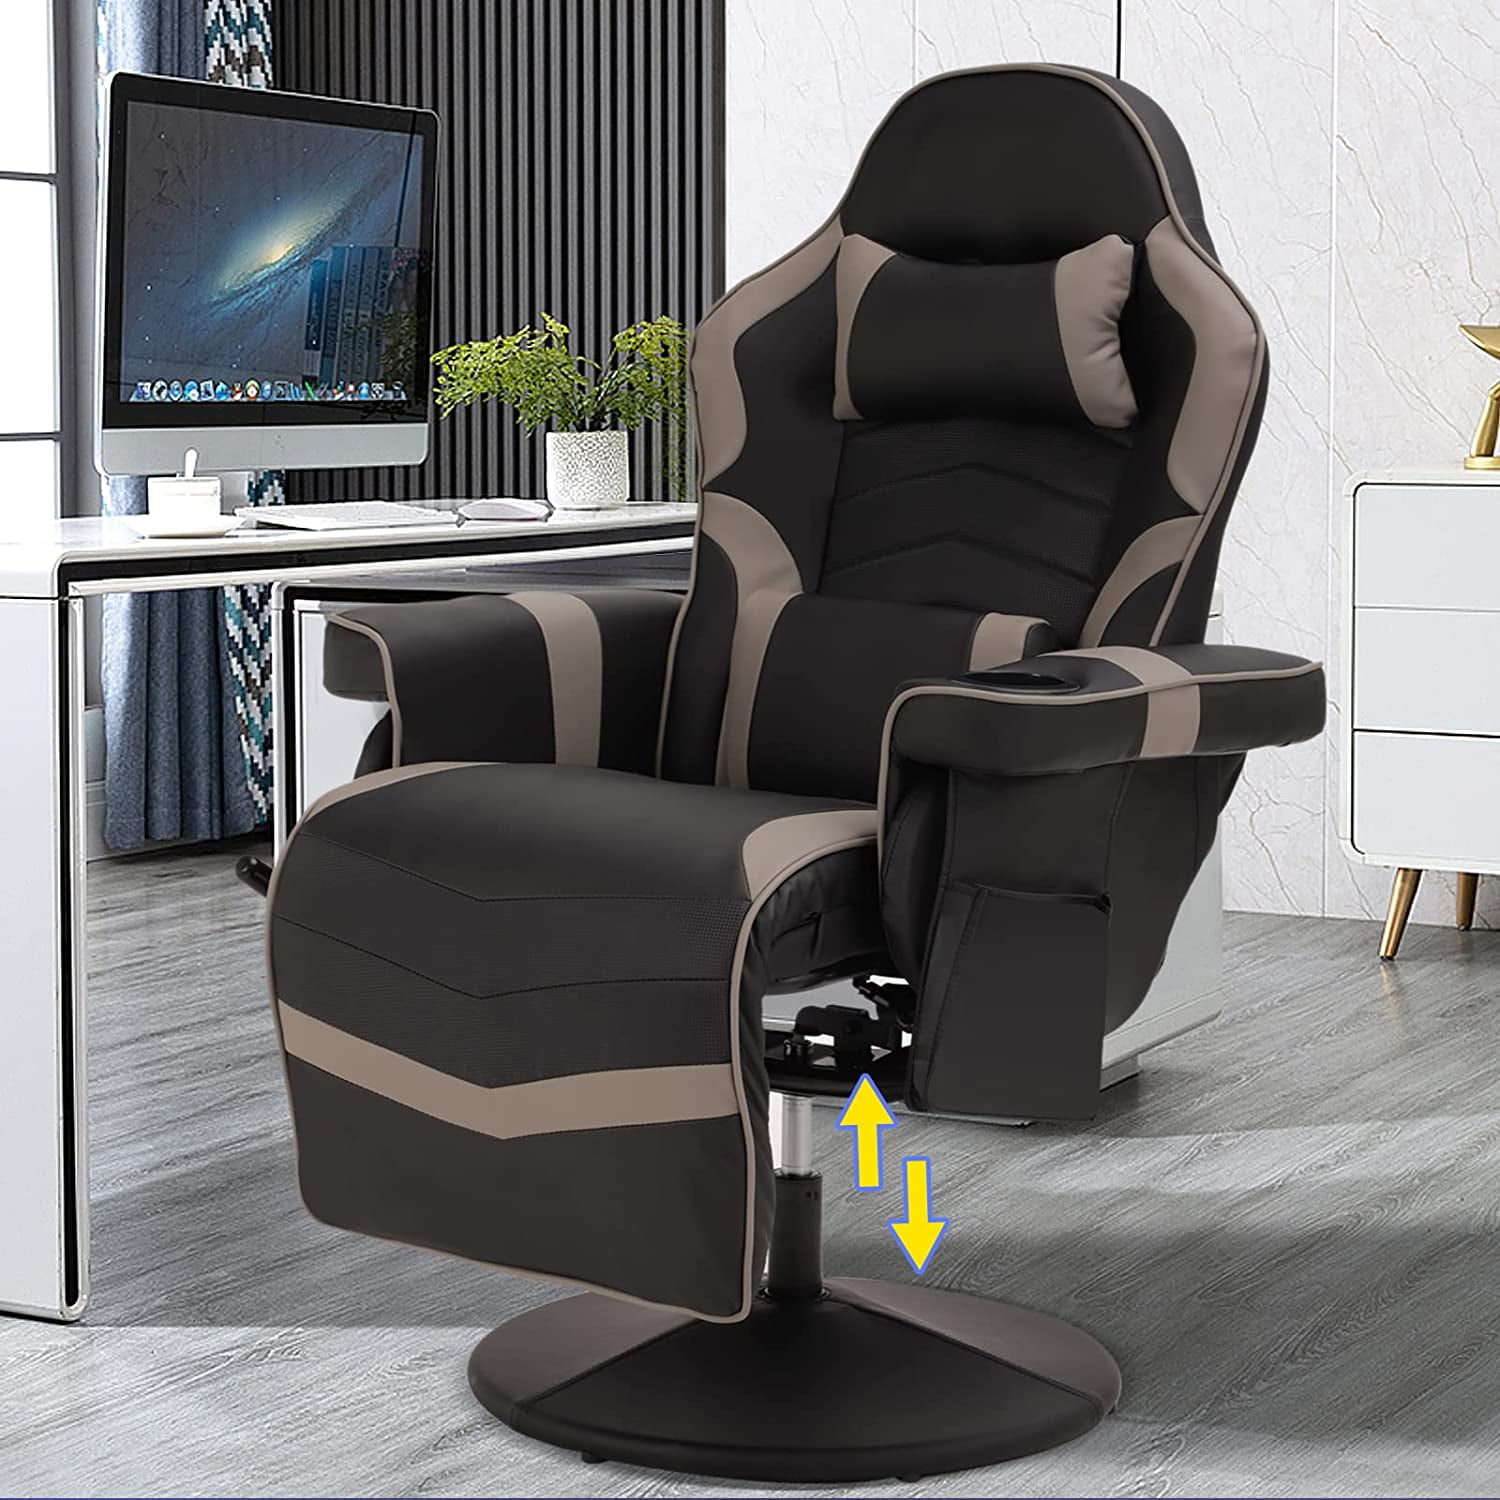  Homoyoyo Seat Recliner Desk Chair Gaming Chair Office